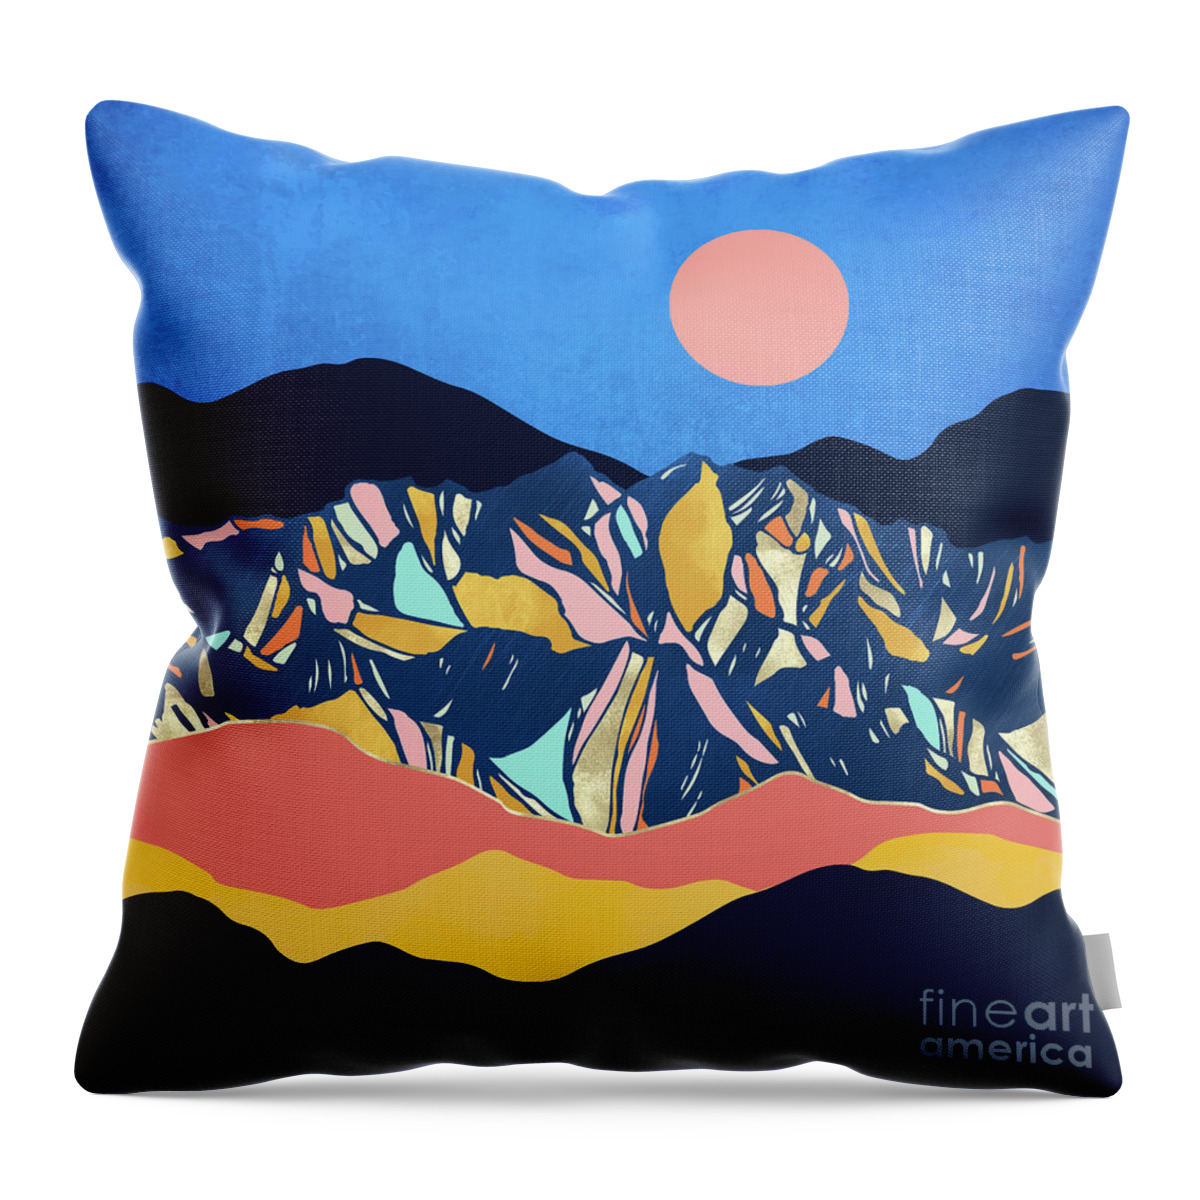 Blue Throw Pillow featuring the digital art Blue Twilight by Spacefrog Designs